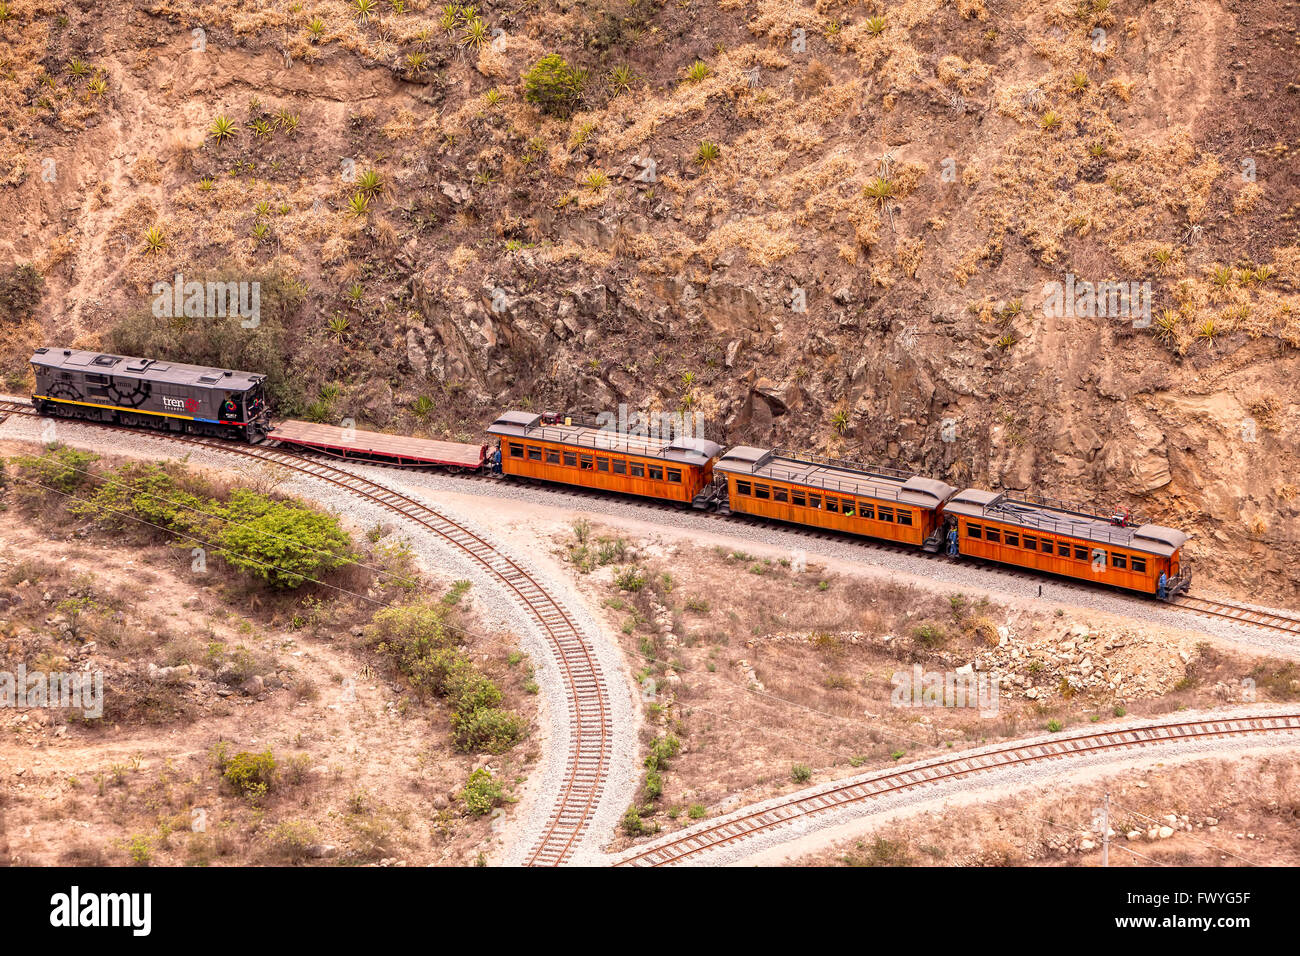 Alausi, Ecuador - 08 December 2011: The Train Stopped In The Station, The Conductor Change Gears, The Train Changes Direction Stock Photo